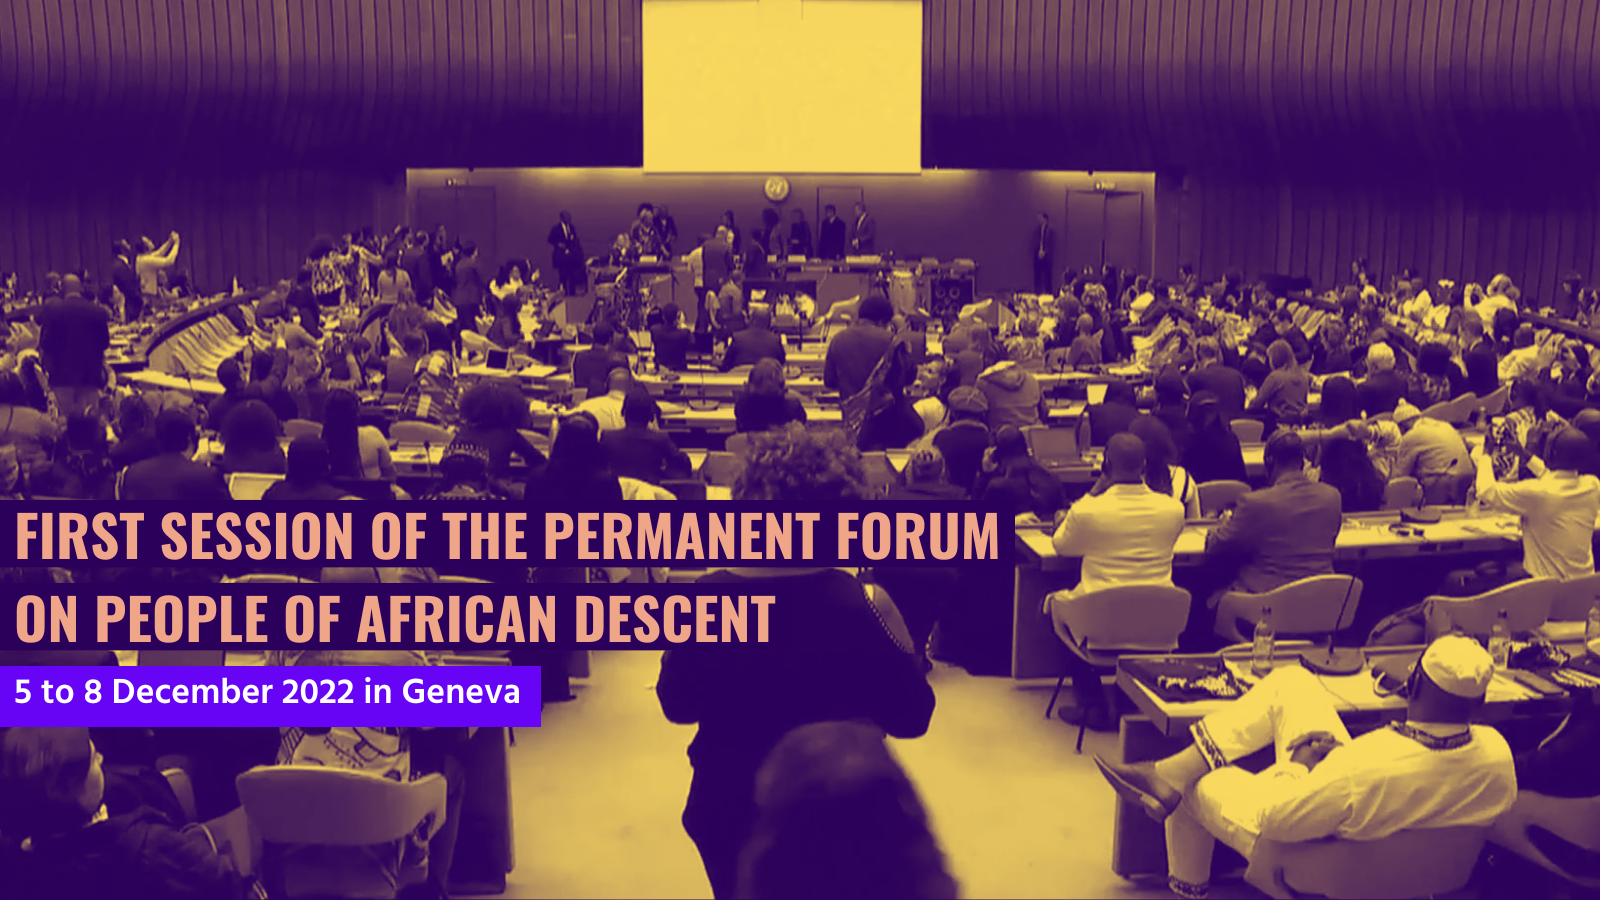 First Session of the Permanent Forum on People of African Descent